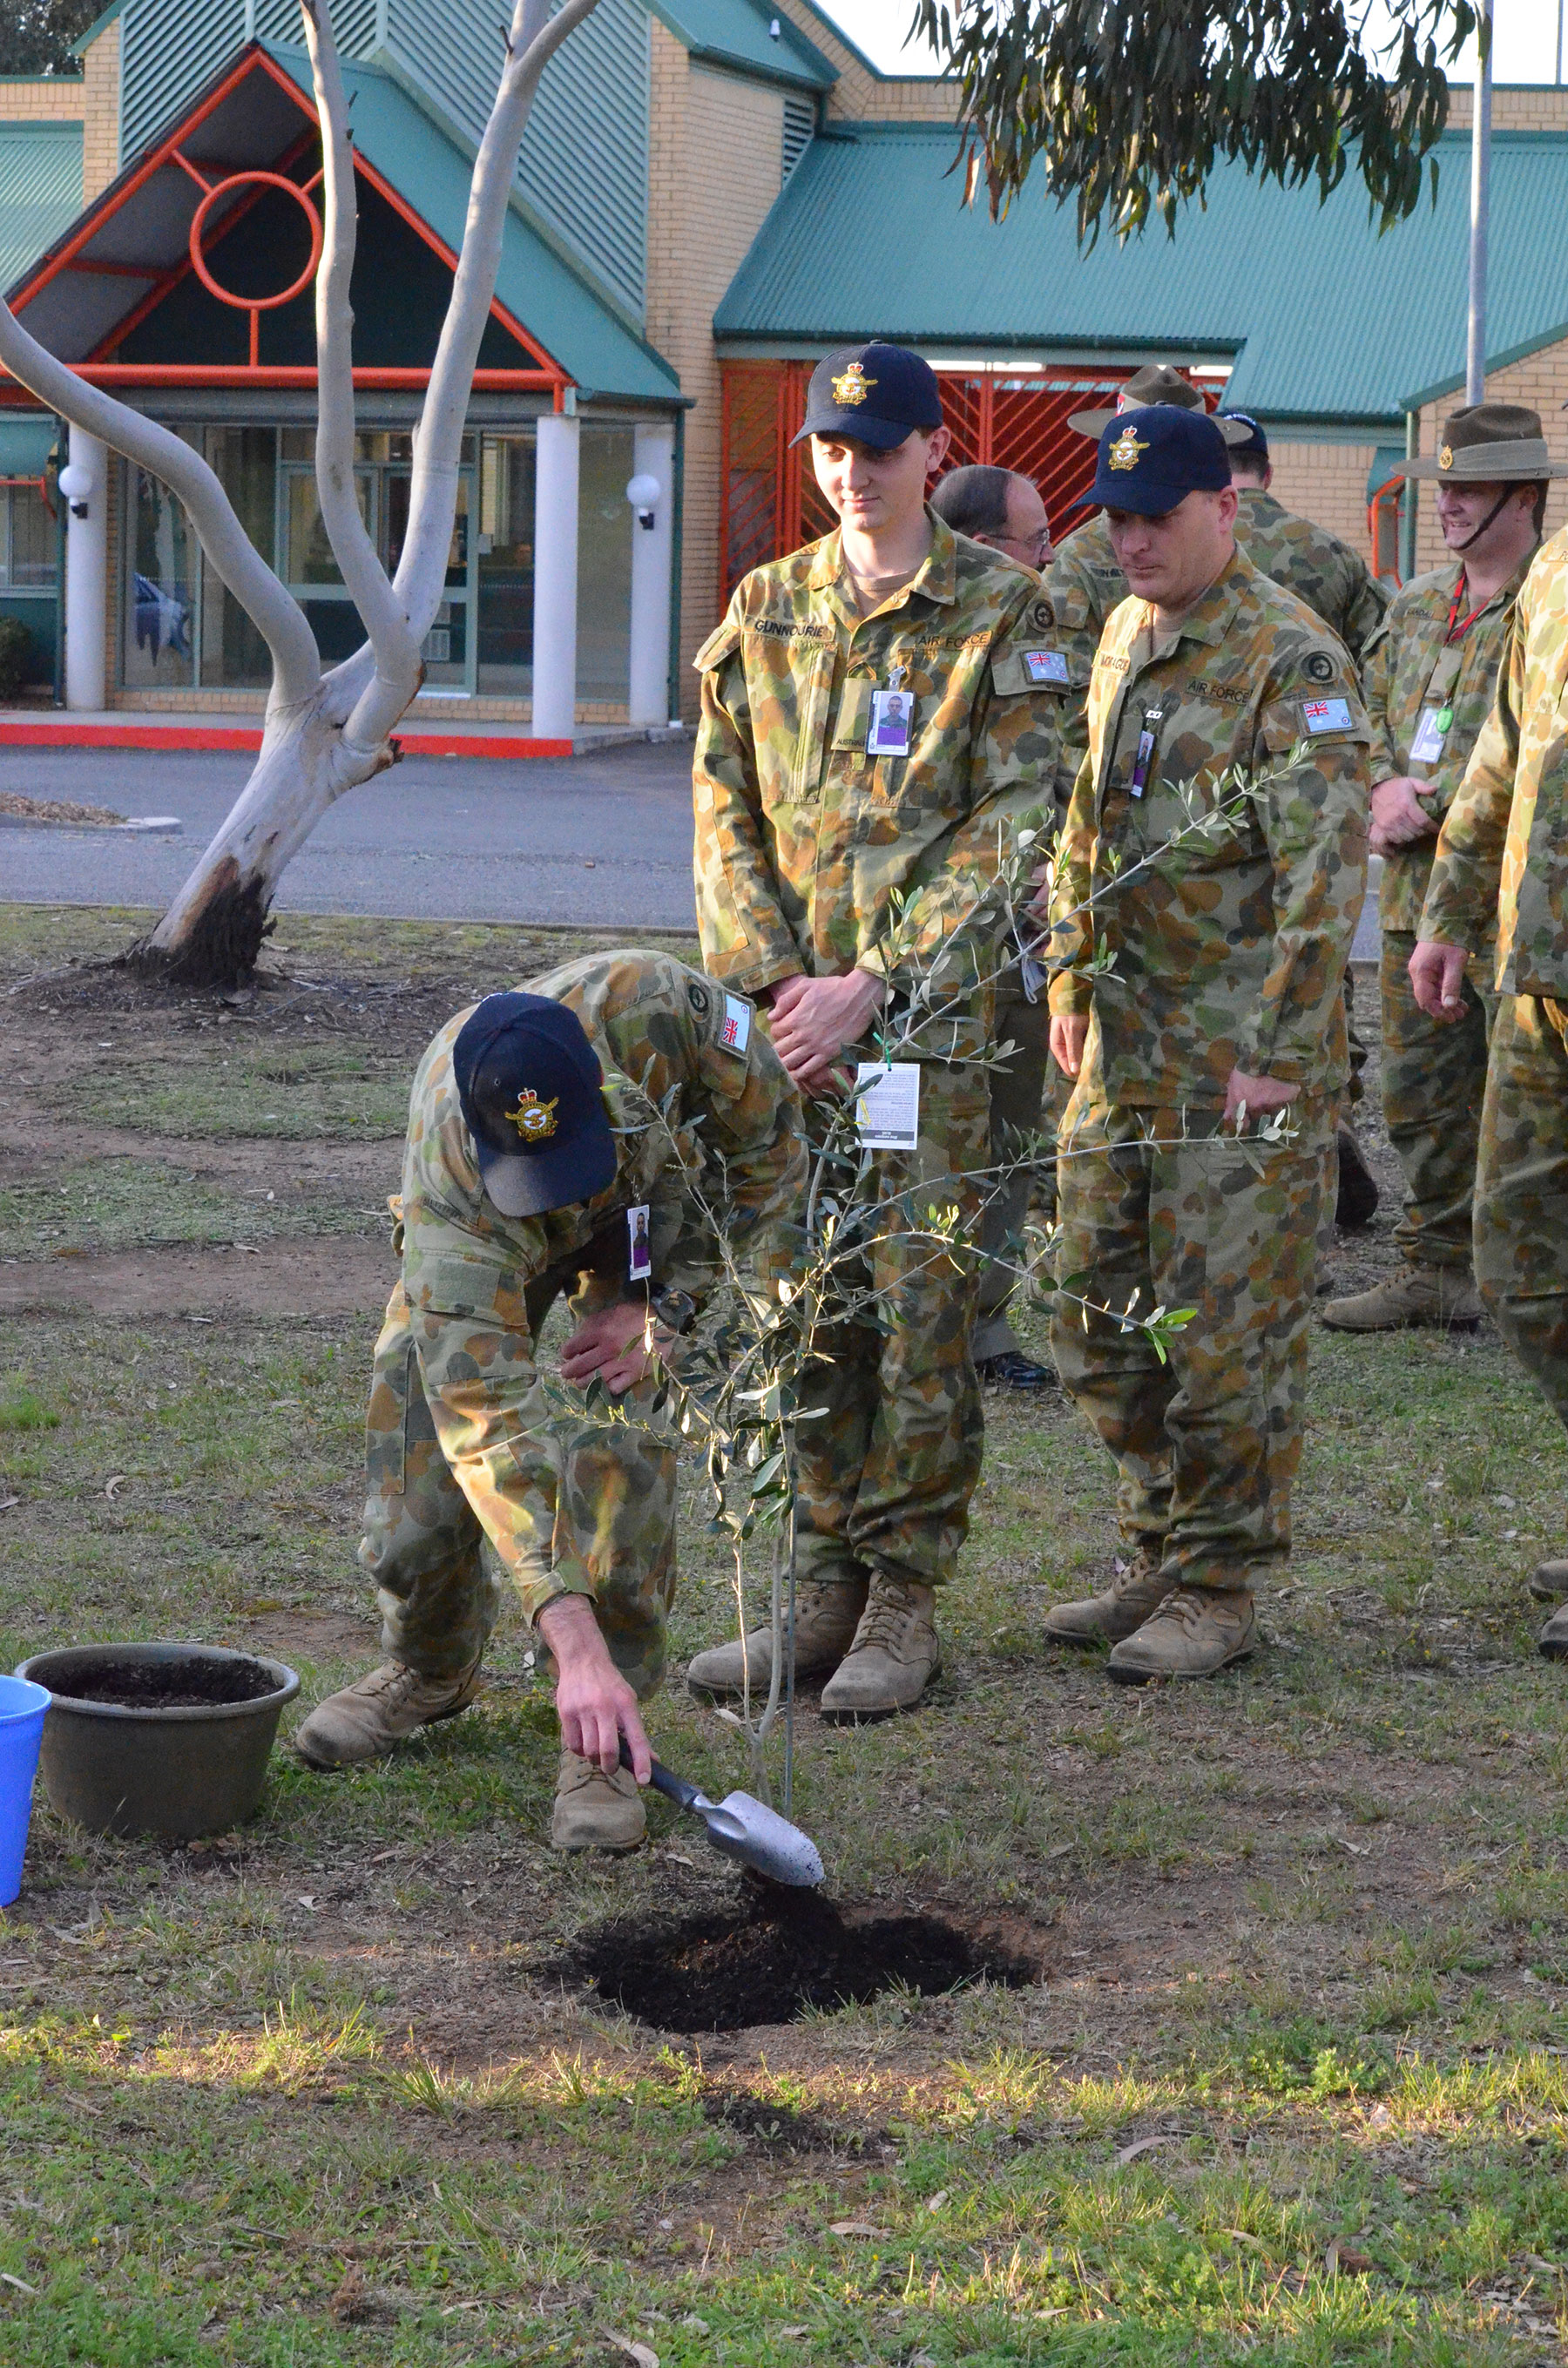 09 Troops Planting Olive Trees as Part of Lamia Barracks Commemorations 16 Sept 2011